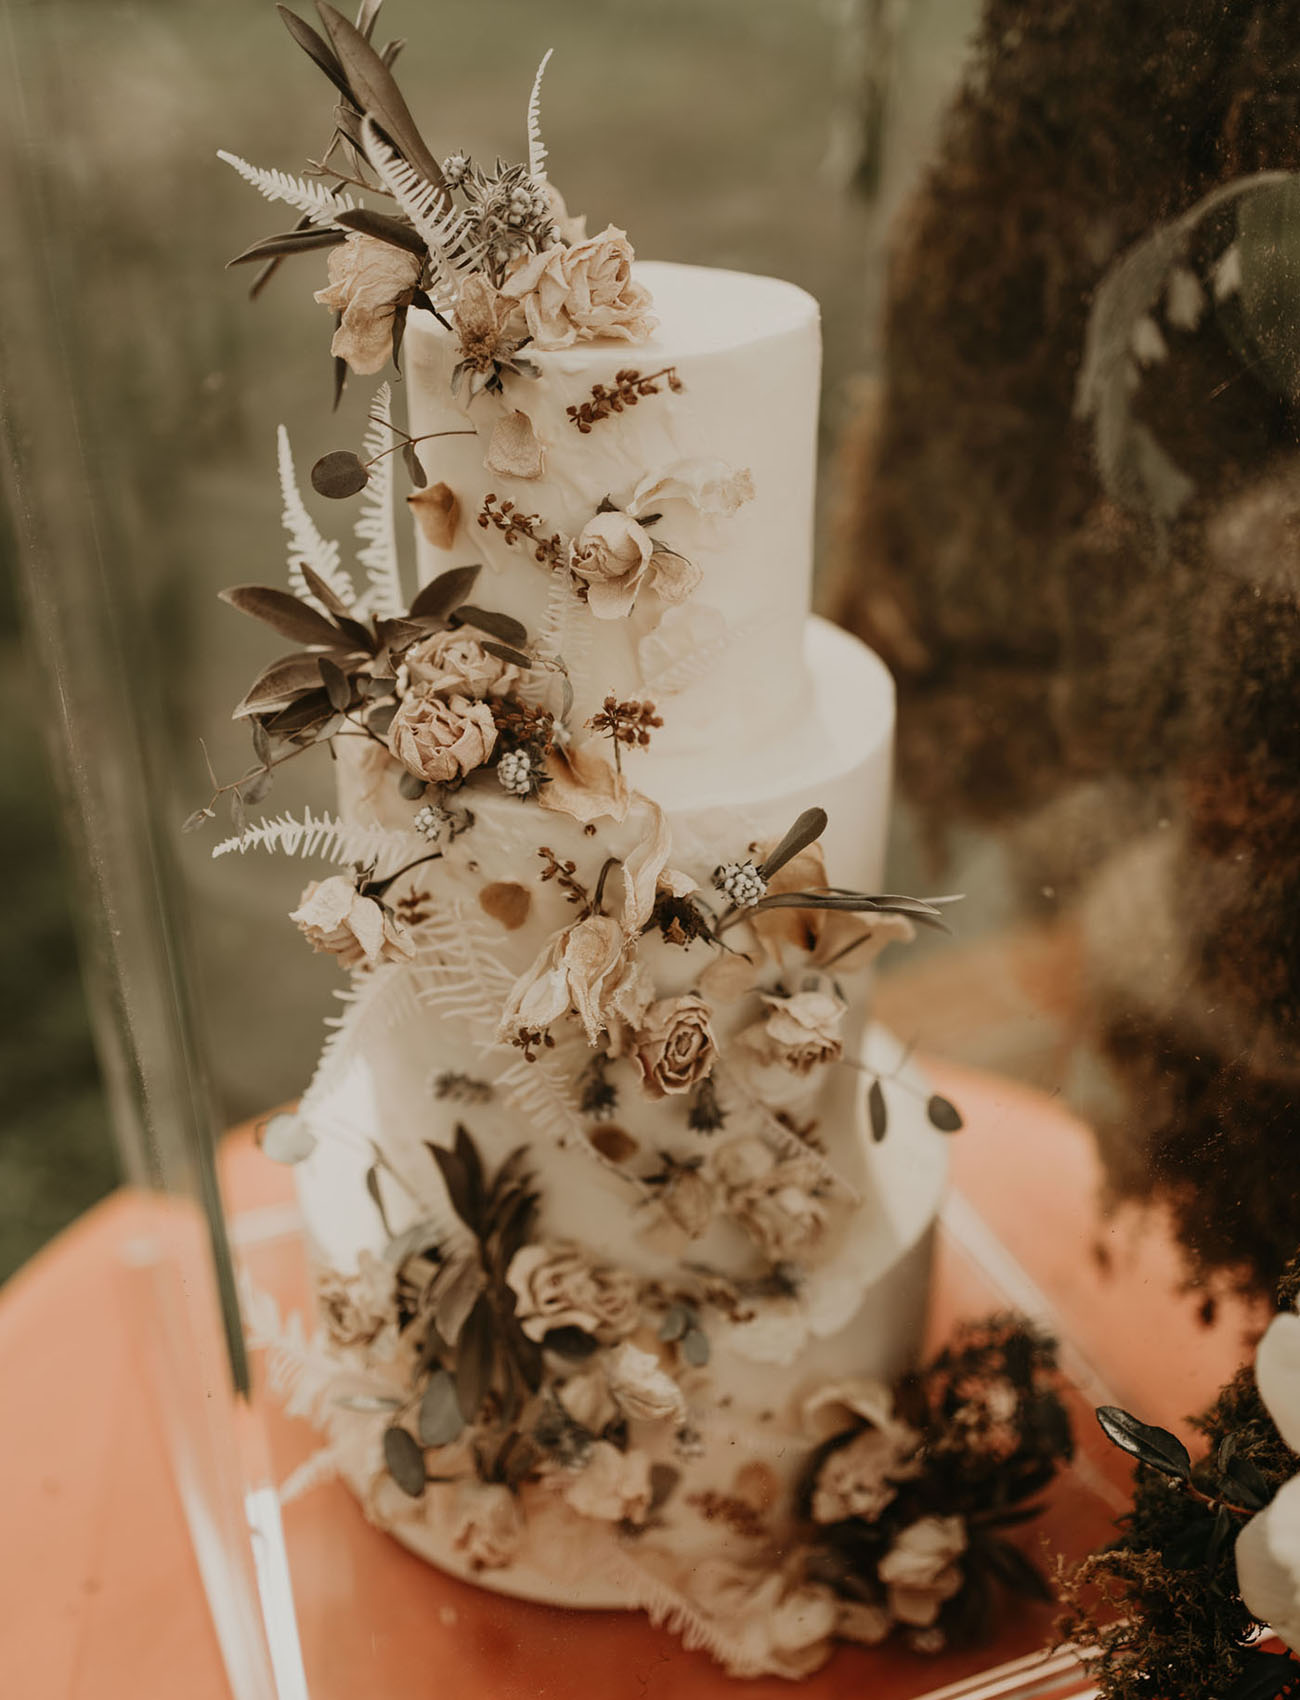 The wedding cake was a white one with dried blooms and herbs and leaves for a decadent feel